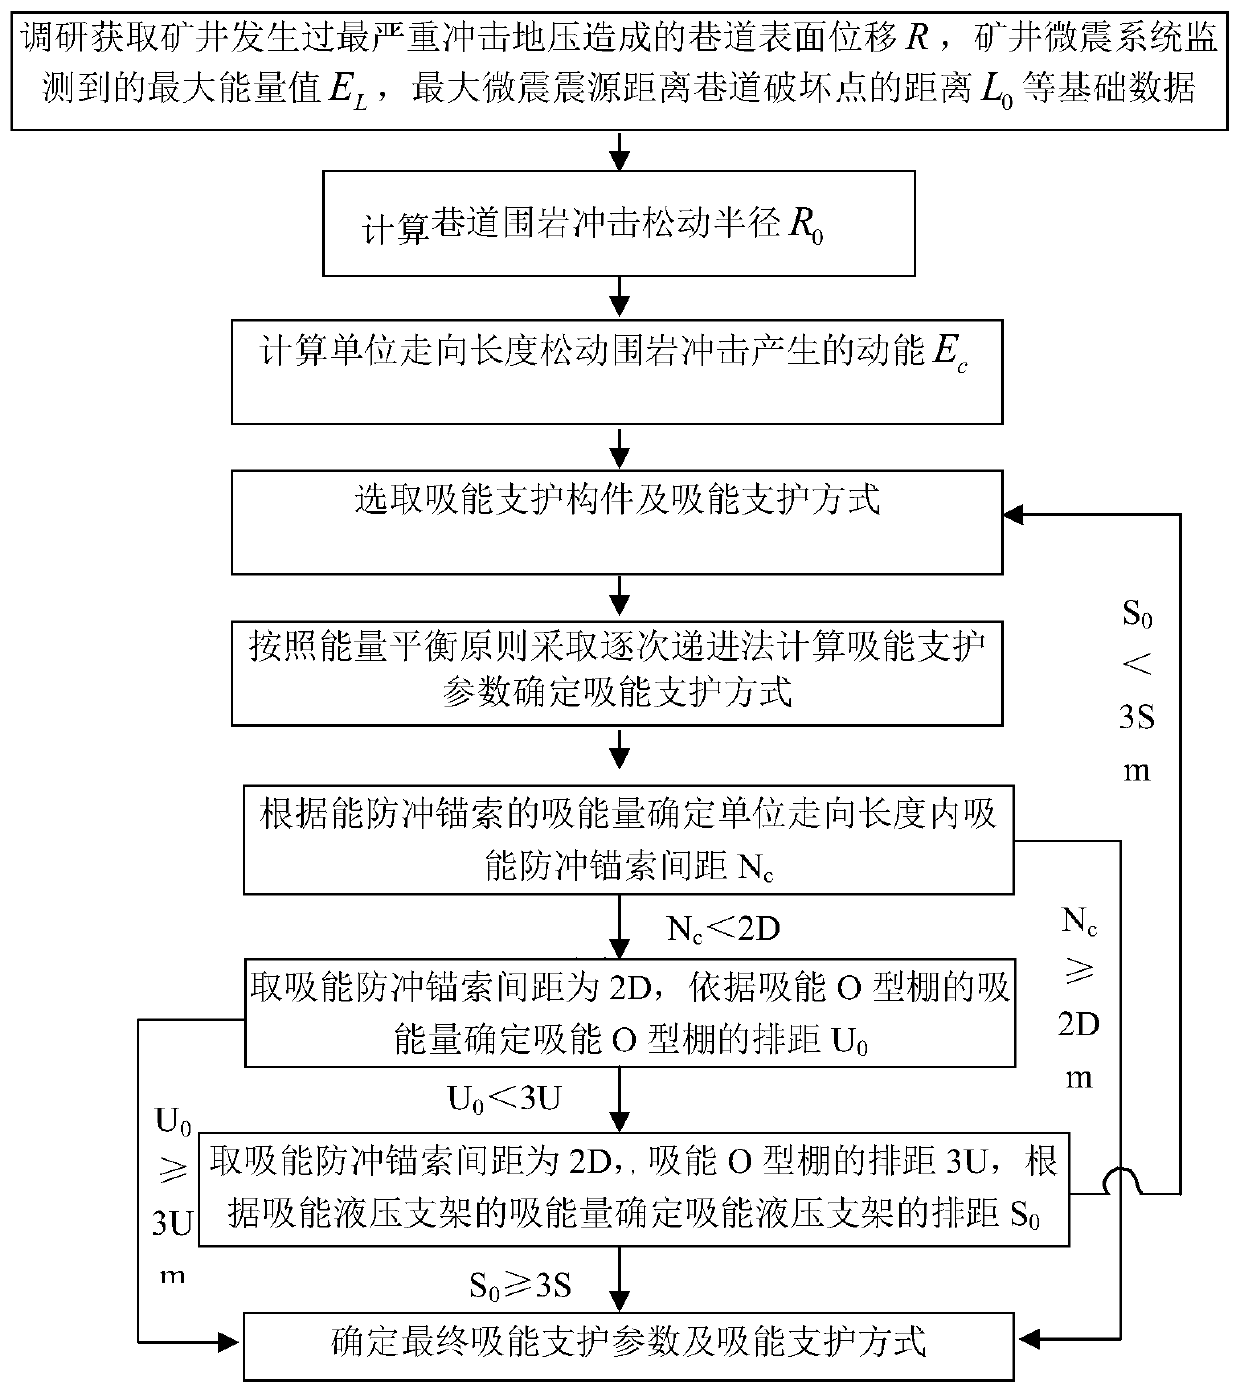 Three-stage energy absorption support design method for coal mine rock burst roadway